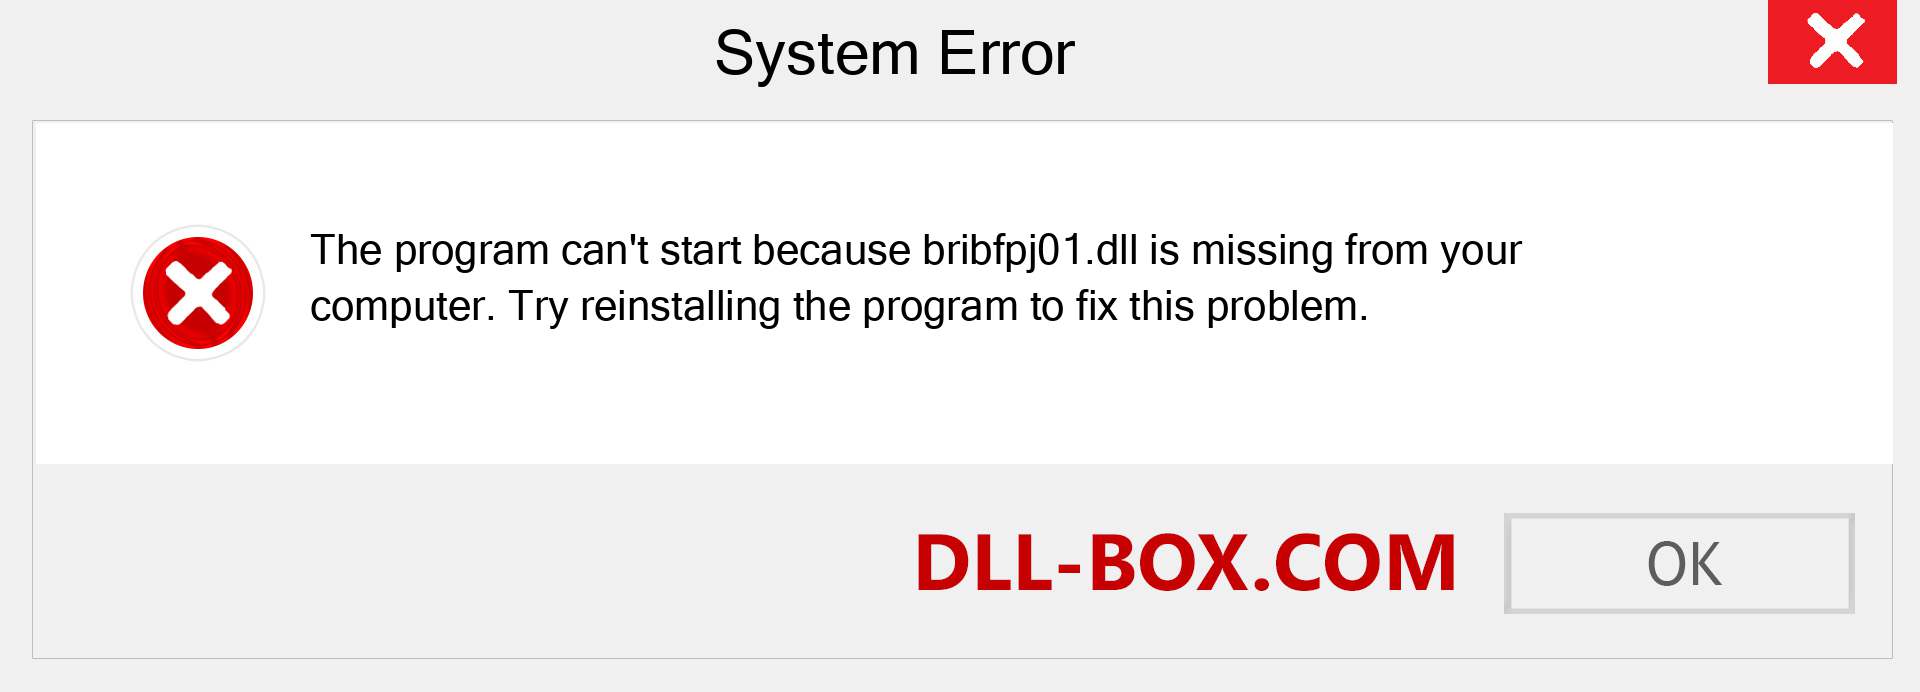  bribfpj01.dll file is missing?. Download for Windows 7, 8, 10 - Fix  bribfpj01 dll Missing Error on Windows, photos, images